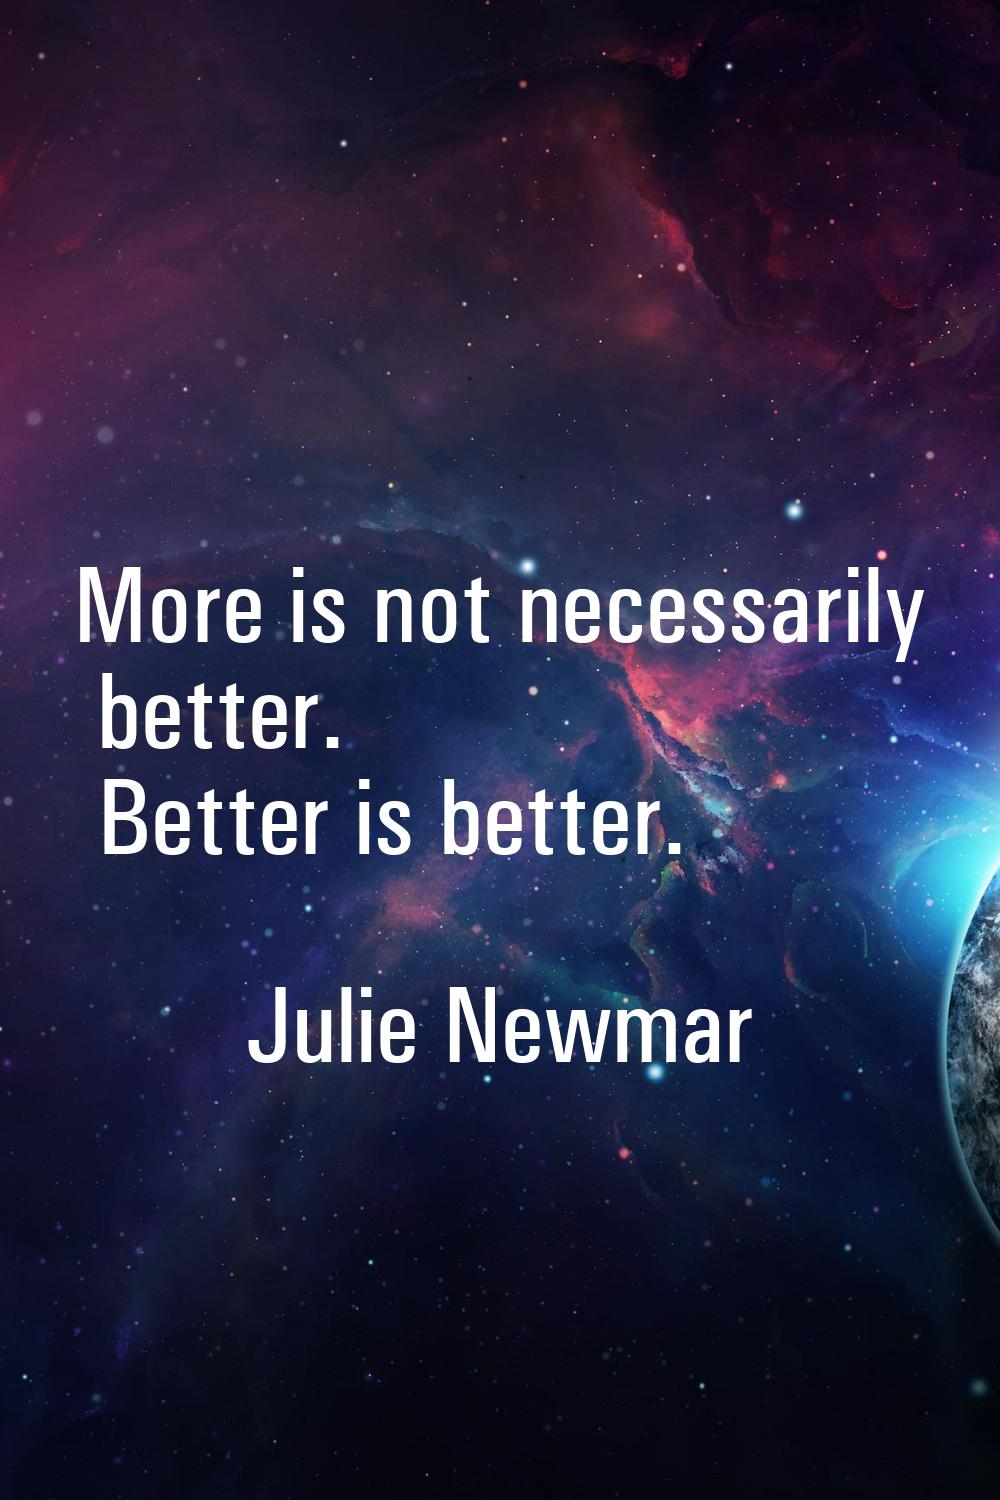 More is not necessarily better. Better is better.